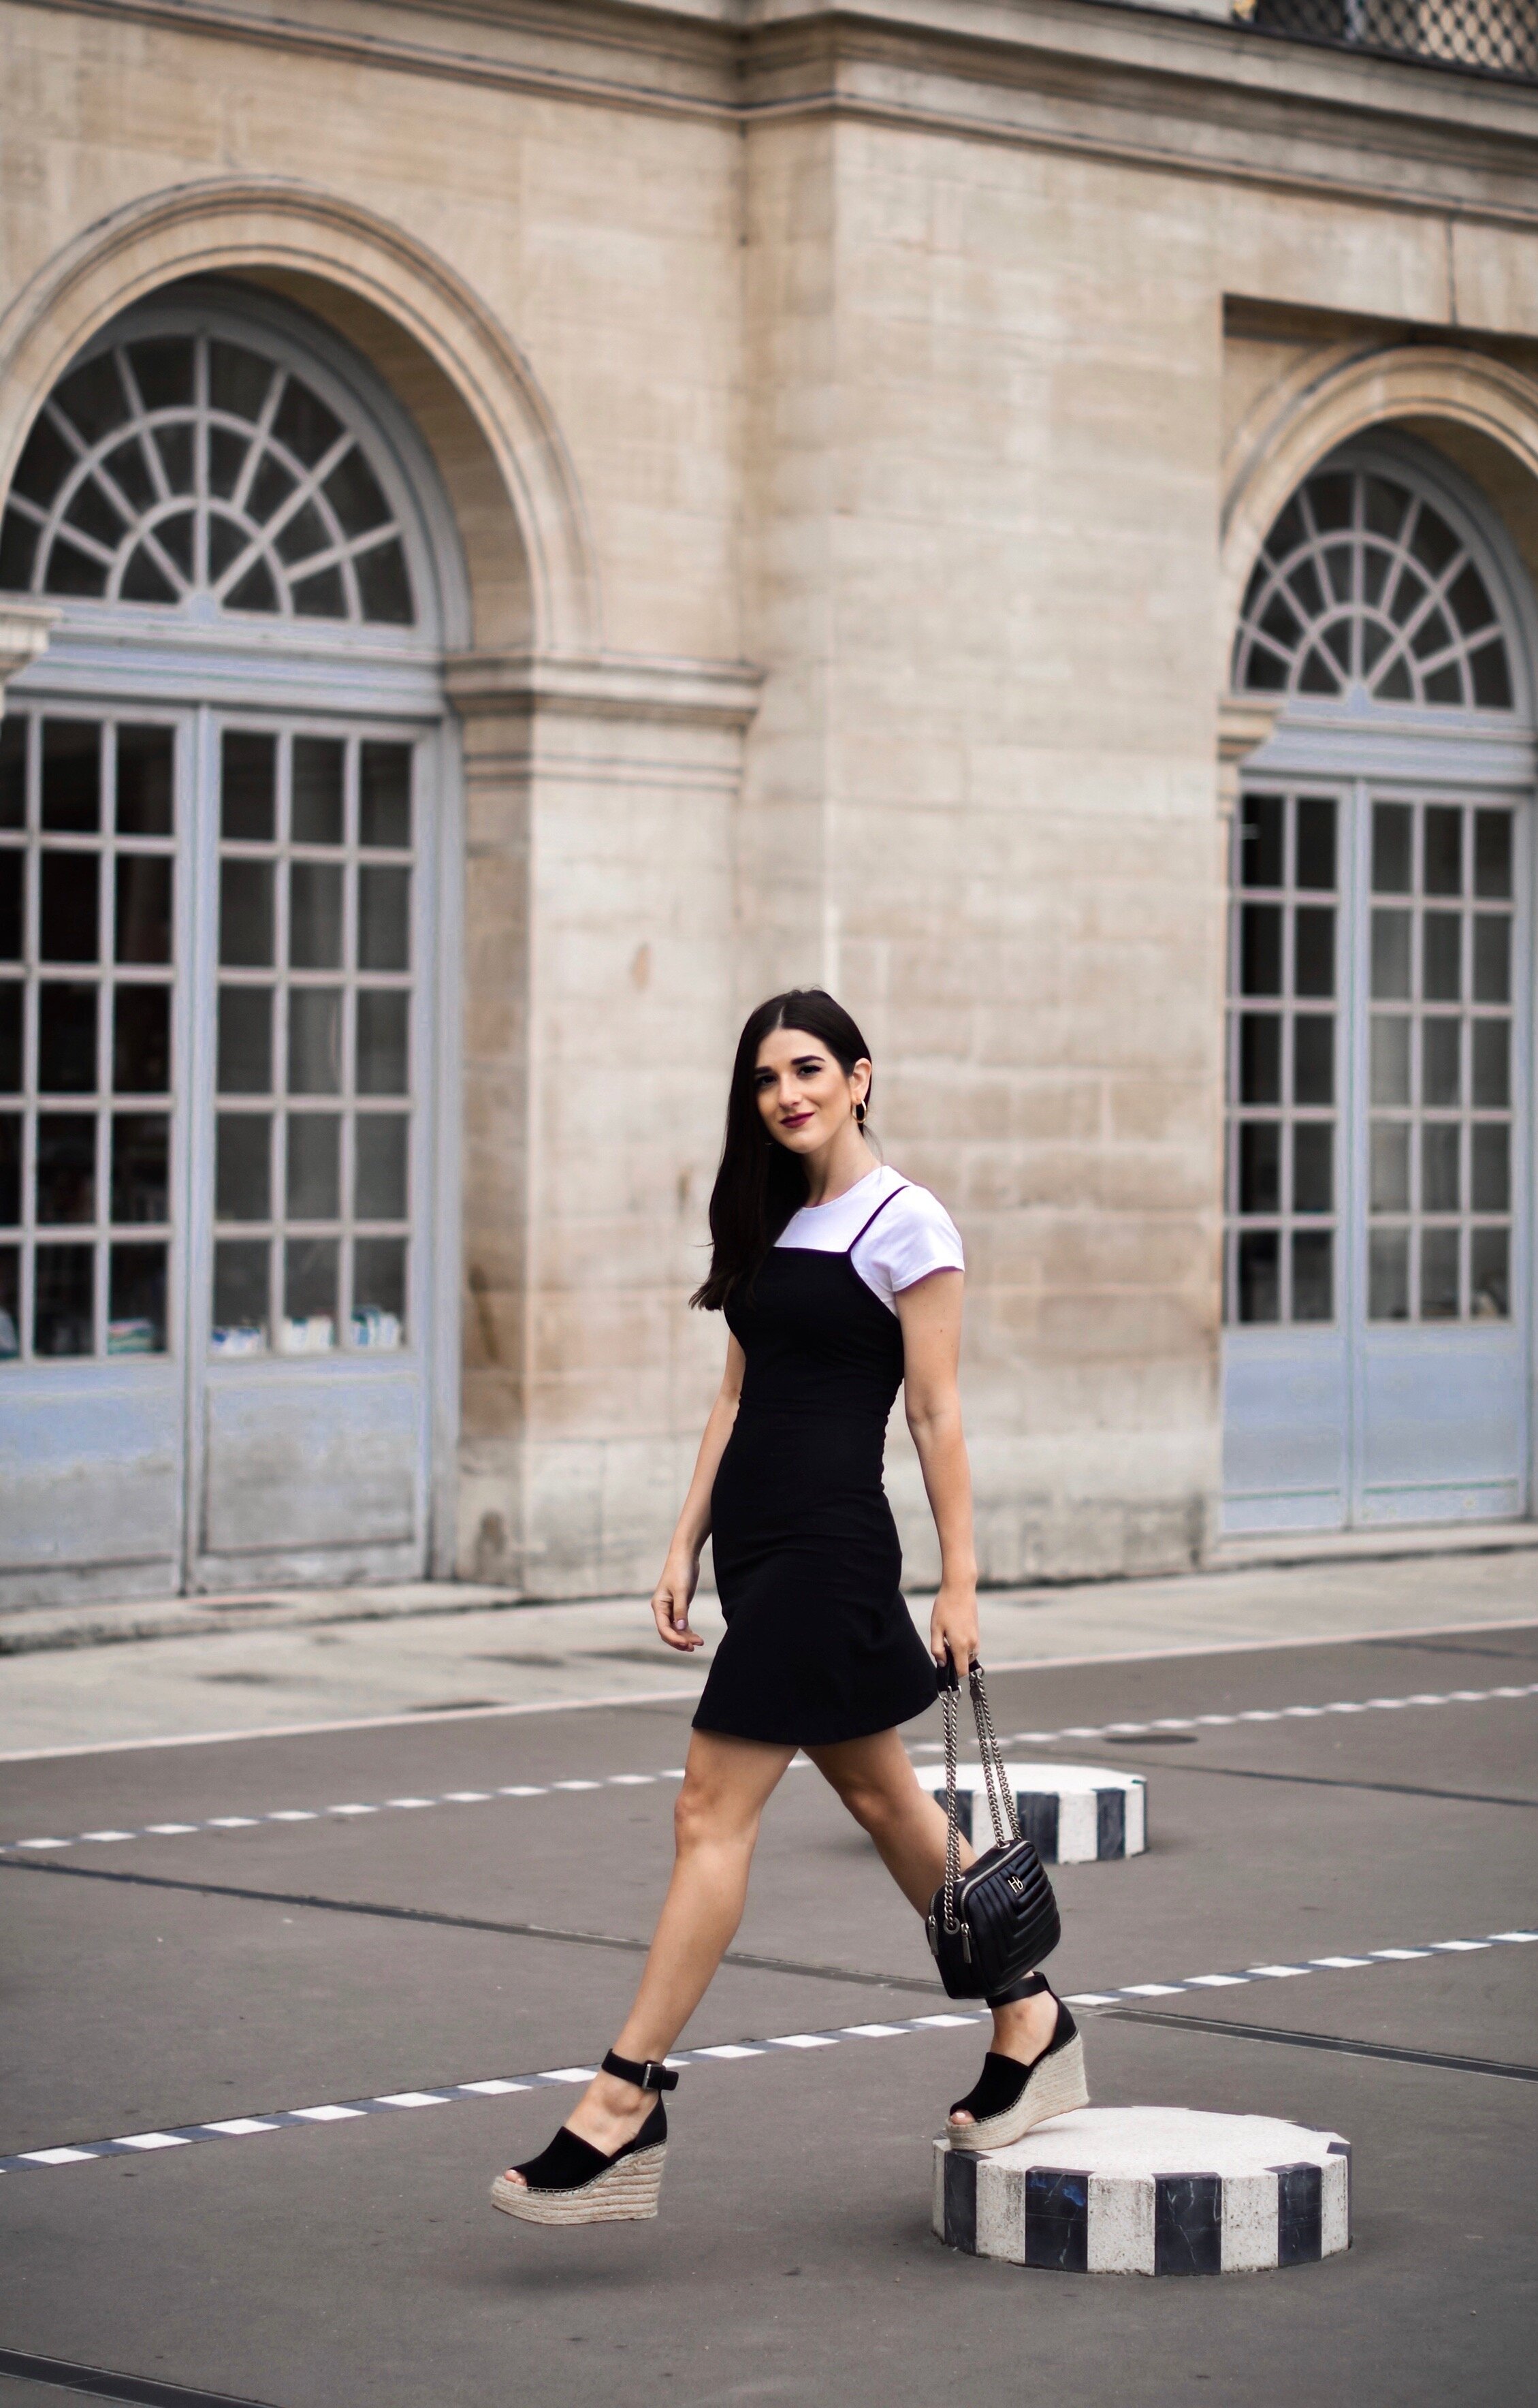 My Top 10 Favorite Spots In Paris Esther Santer NYC Street Style Blogger Travel Outfit What To Do Where To Go Tourist Attractions Saint Germain Moulin Rouge Black and White Pillars Eiffel Tower Versailles Laduree Saint Michel Bag France Recommendation.jpg